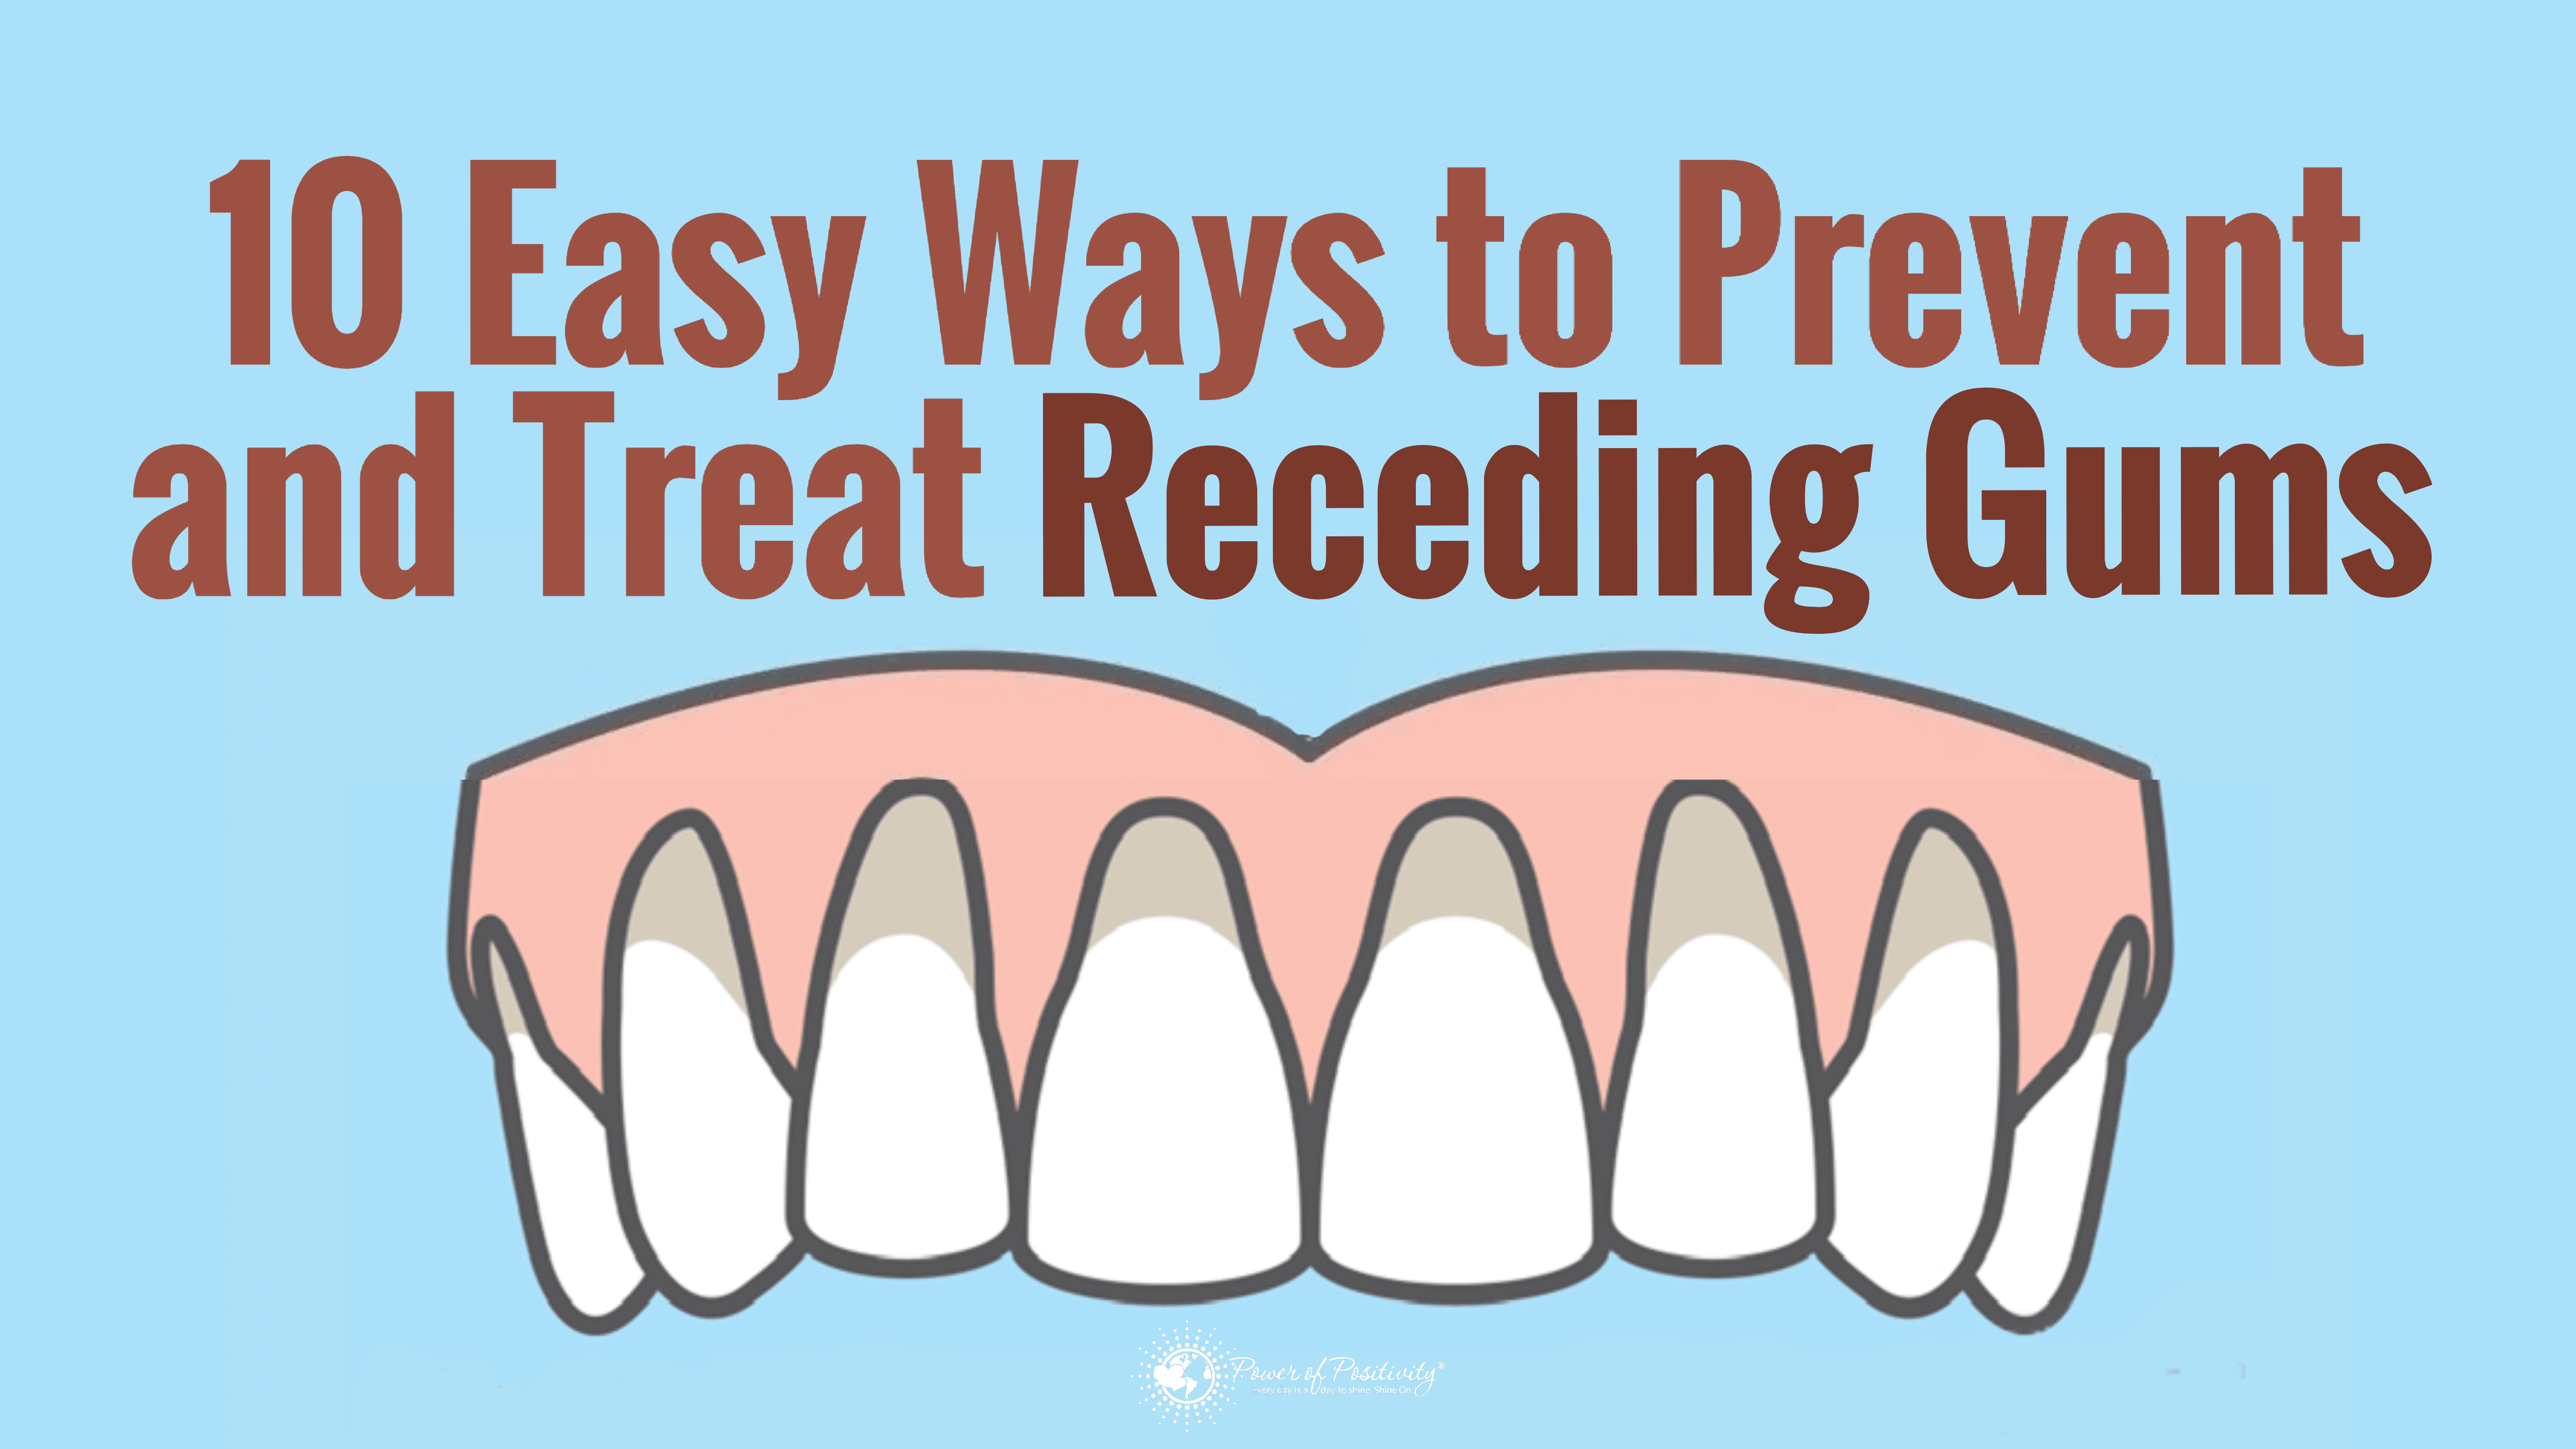 10 Easy Ways to Prevent and Treat Receding Gums